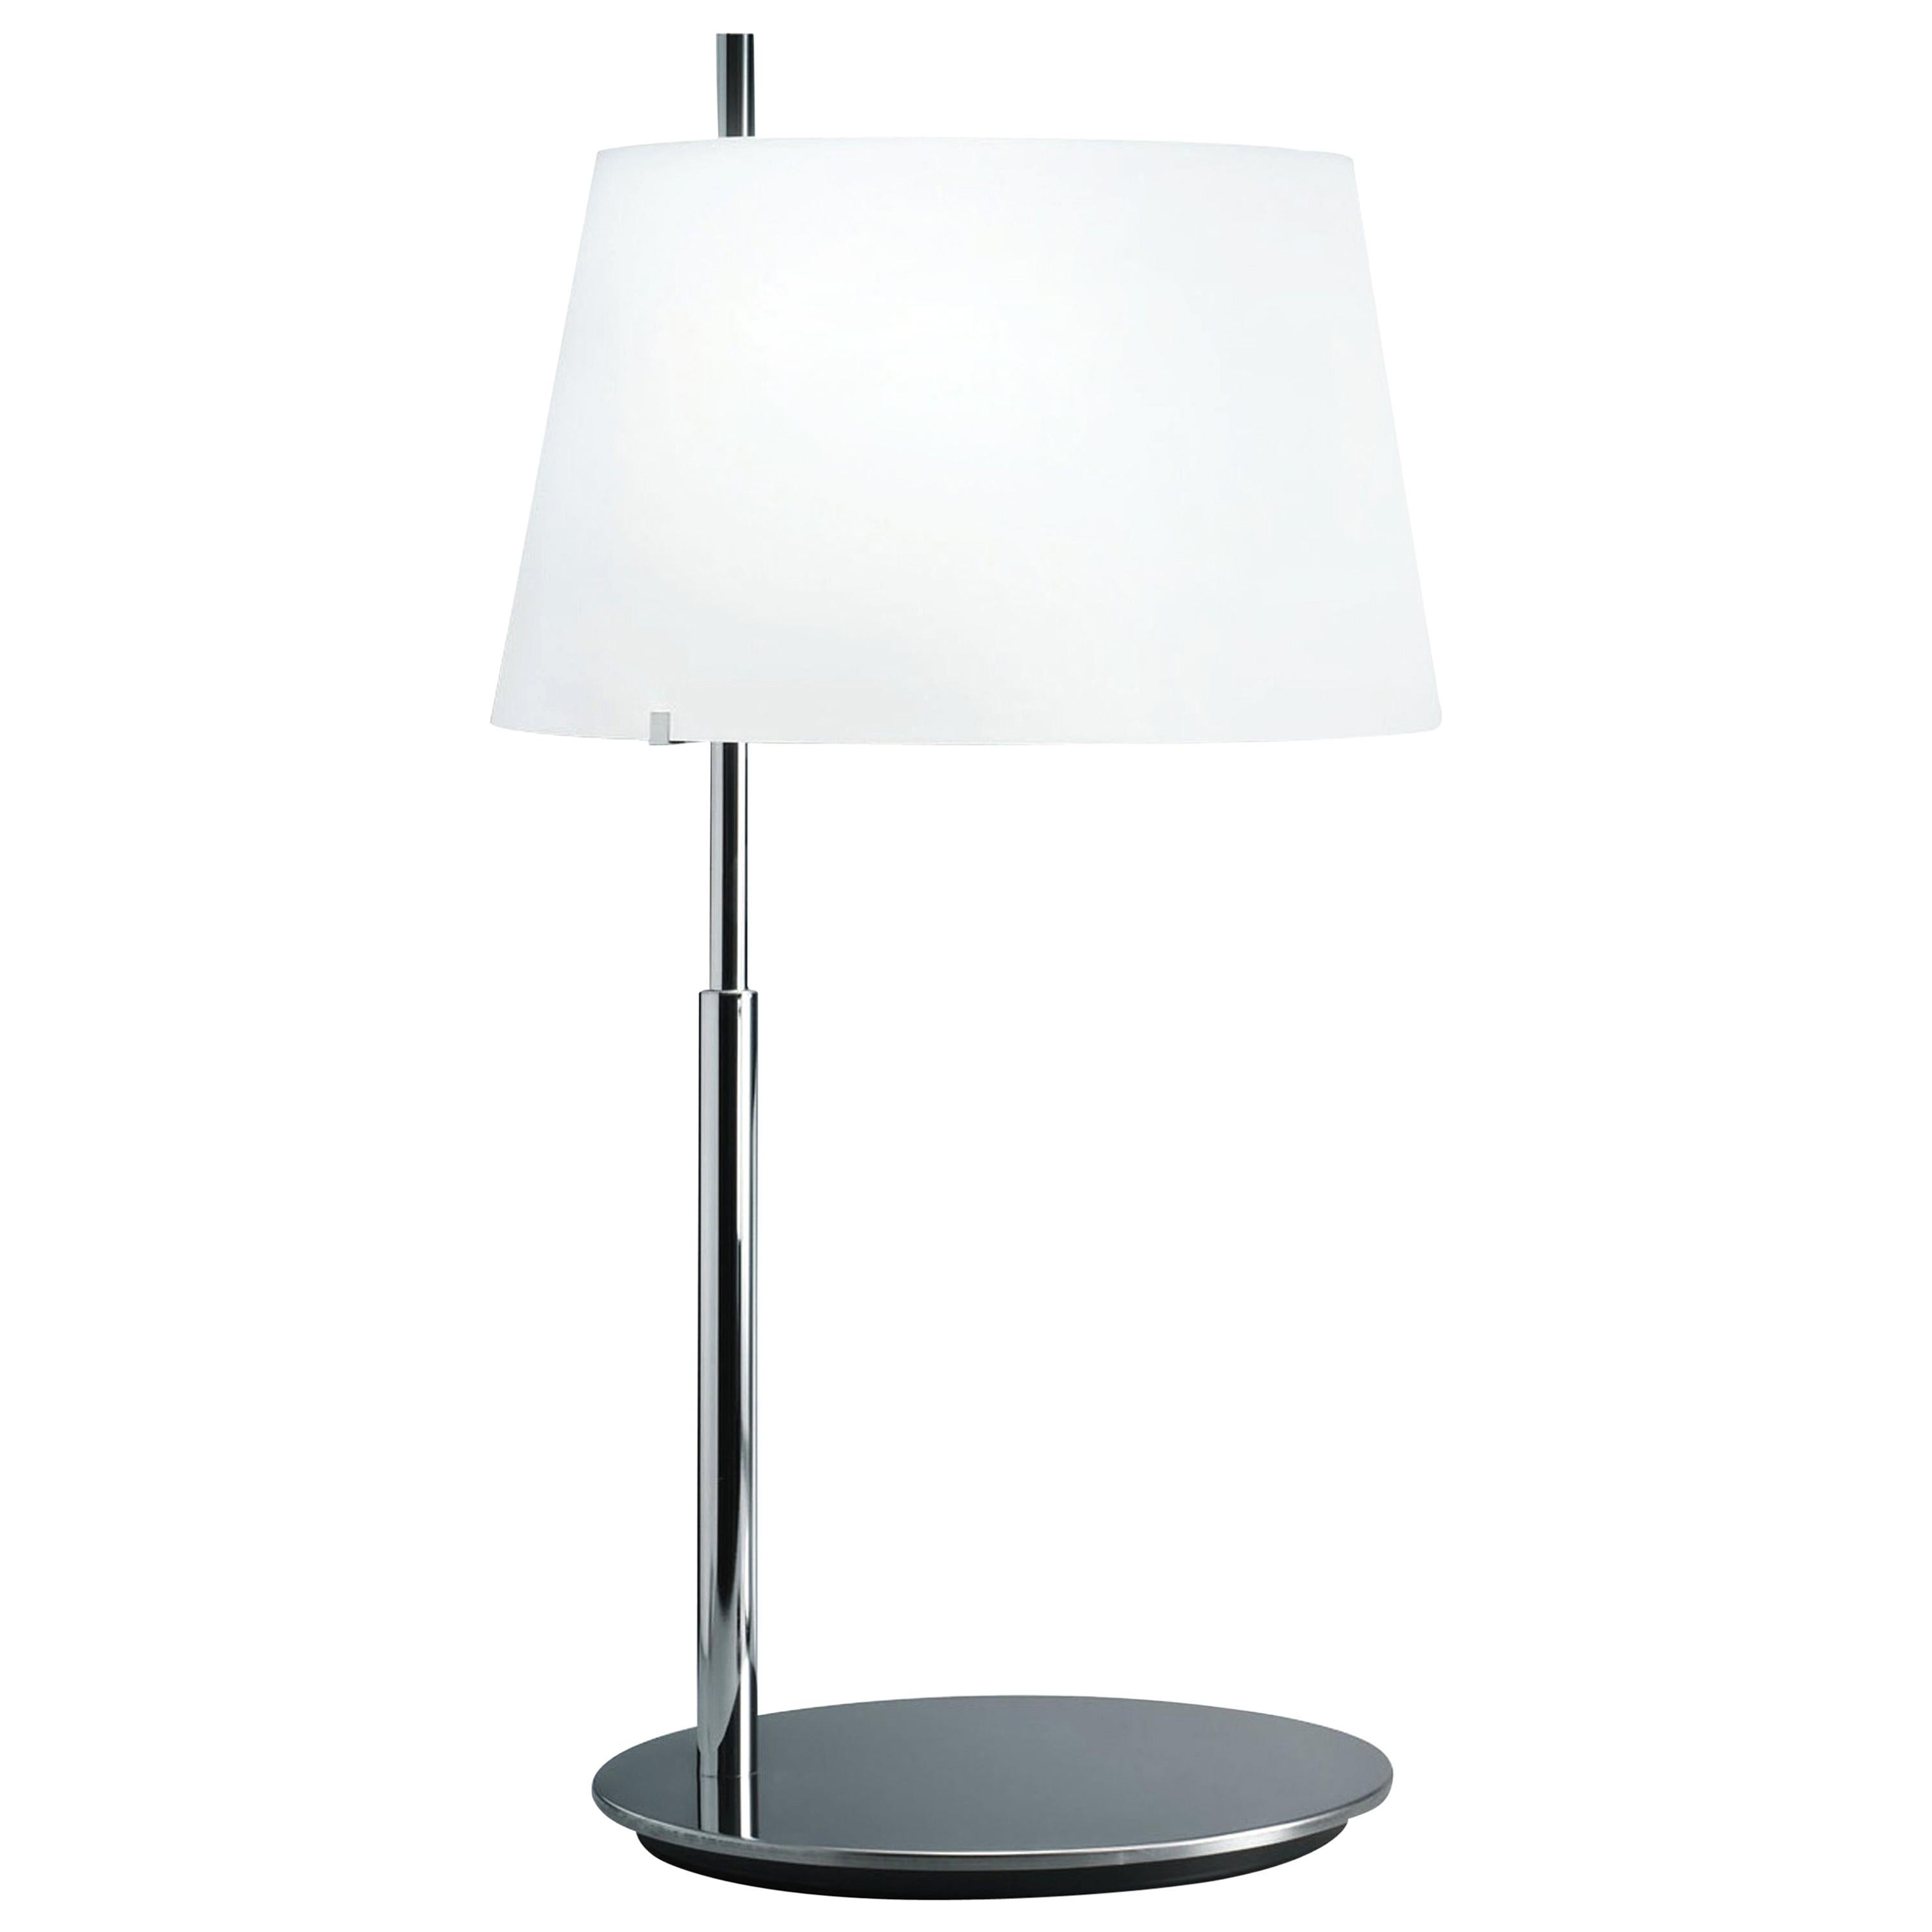 Designed by Studio Beretta in 2004 and manufactured by Fontana Arte, the passion table lamp is a harmonious union of the delicateness of frosted glass and the pureness of metal.

The table lamp is available in chromed CR or brushed nickel-plated NC